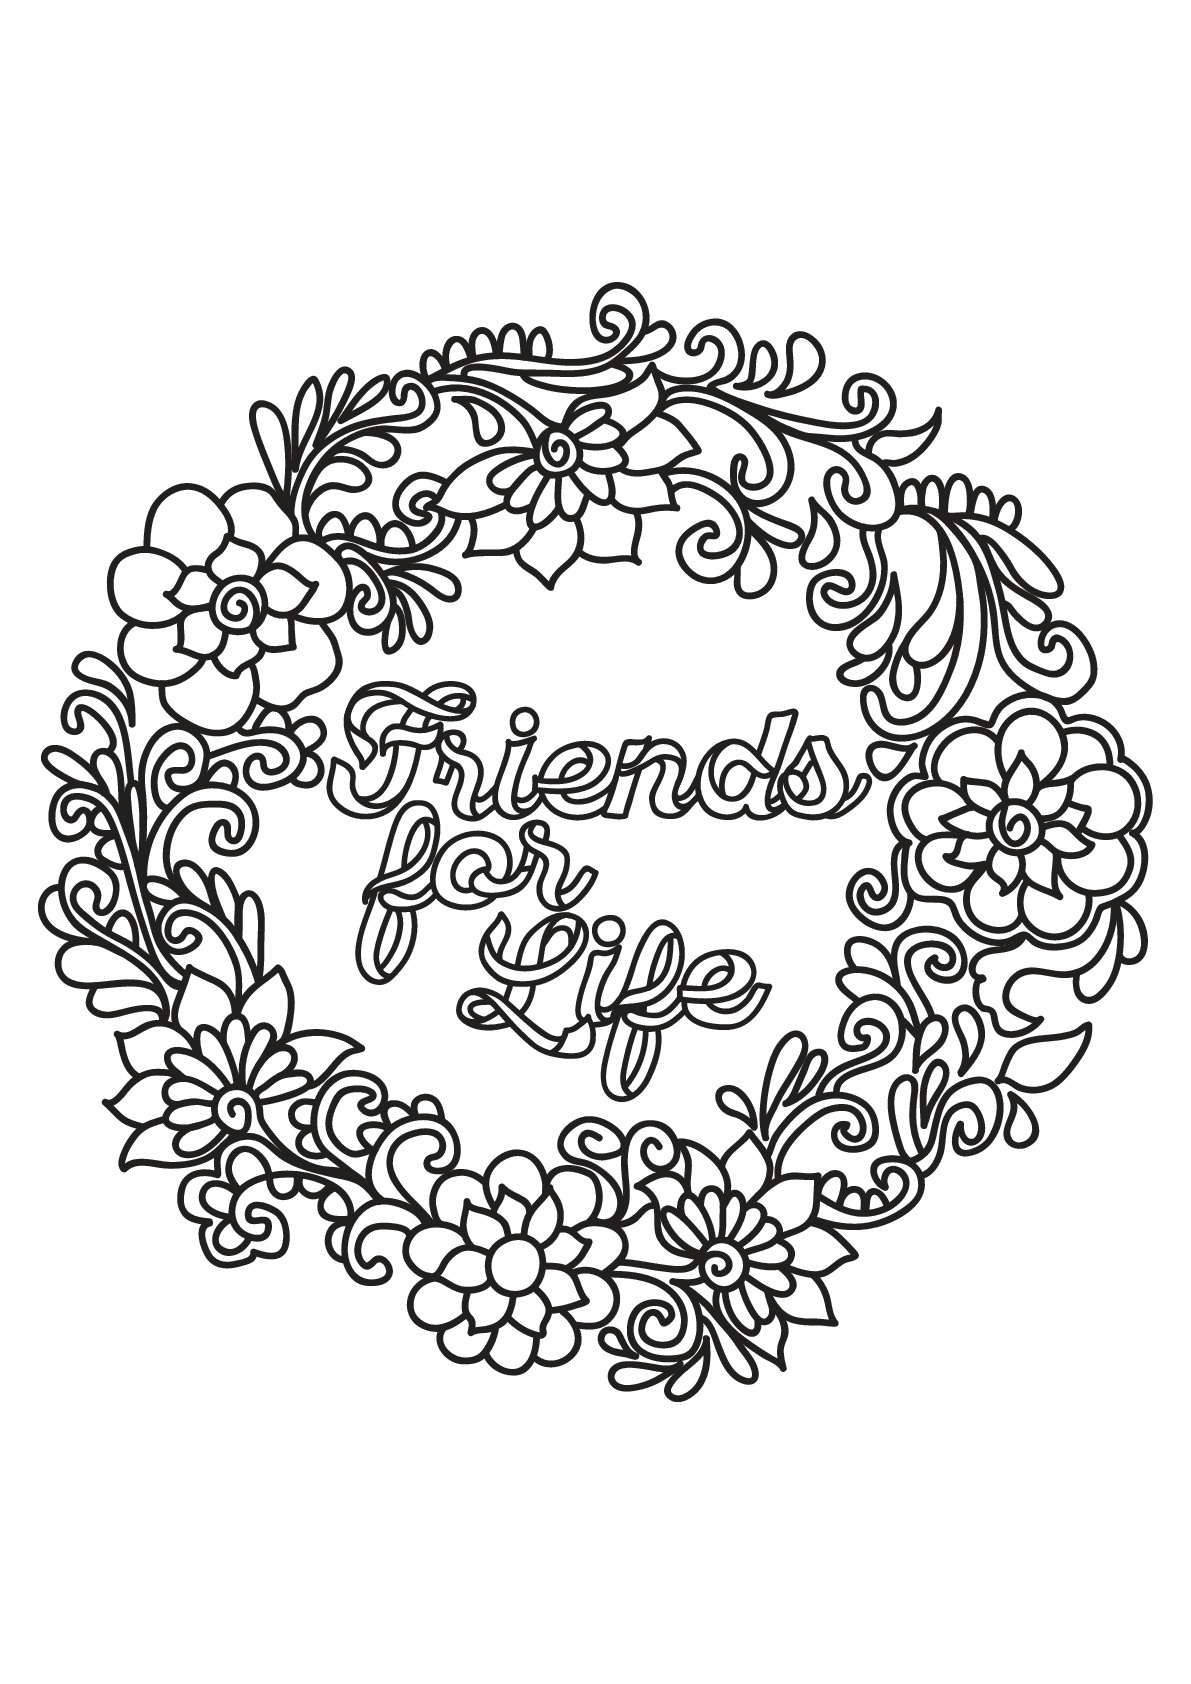 Quotes - Coloring Pages For Adults - Free Printable Quote Coloring Pages For Adults